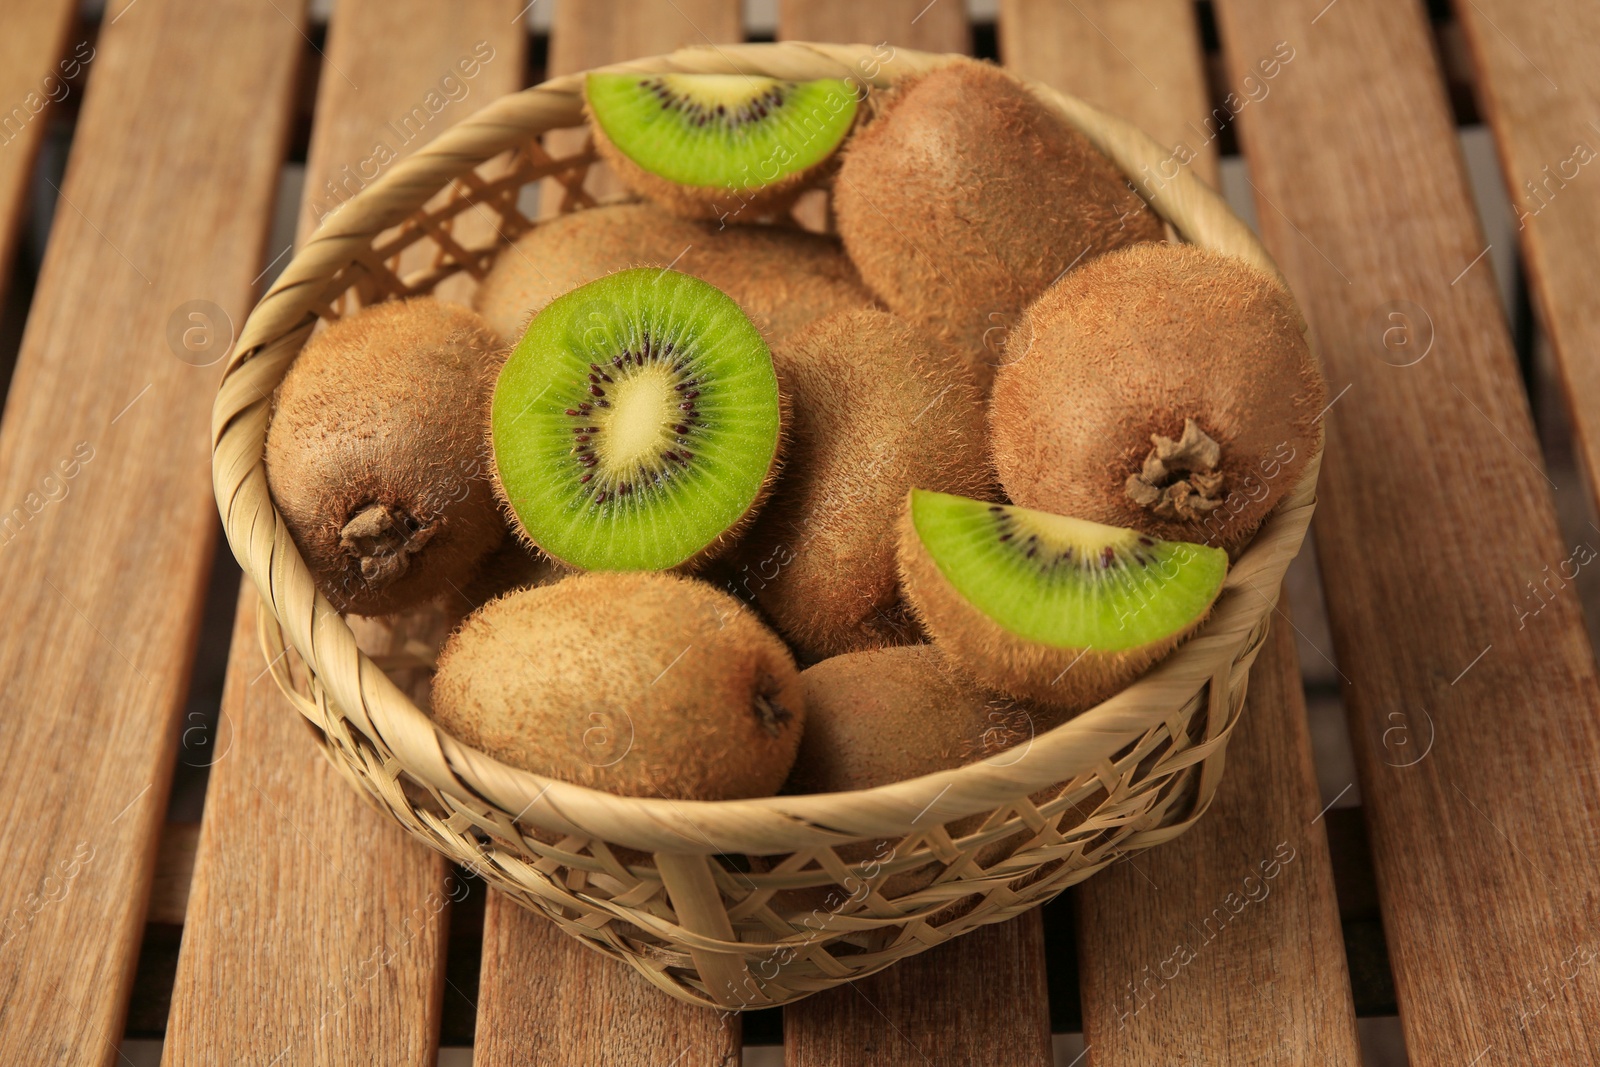 Photo of Wicker basket with whole and cut kiwis on wooden table, closeup